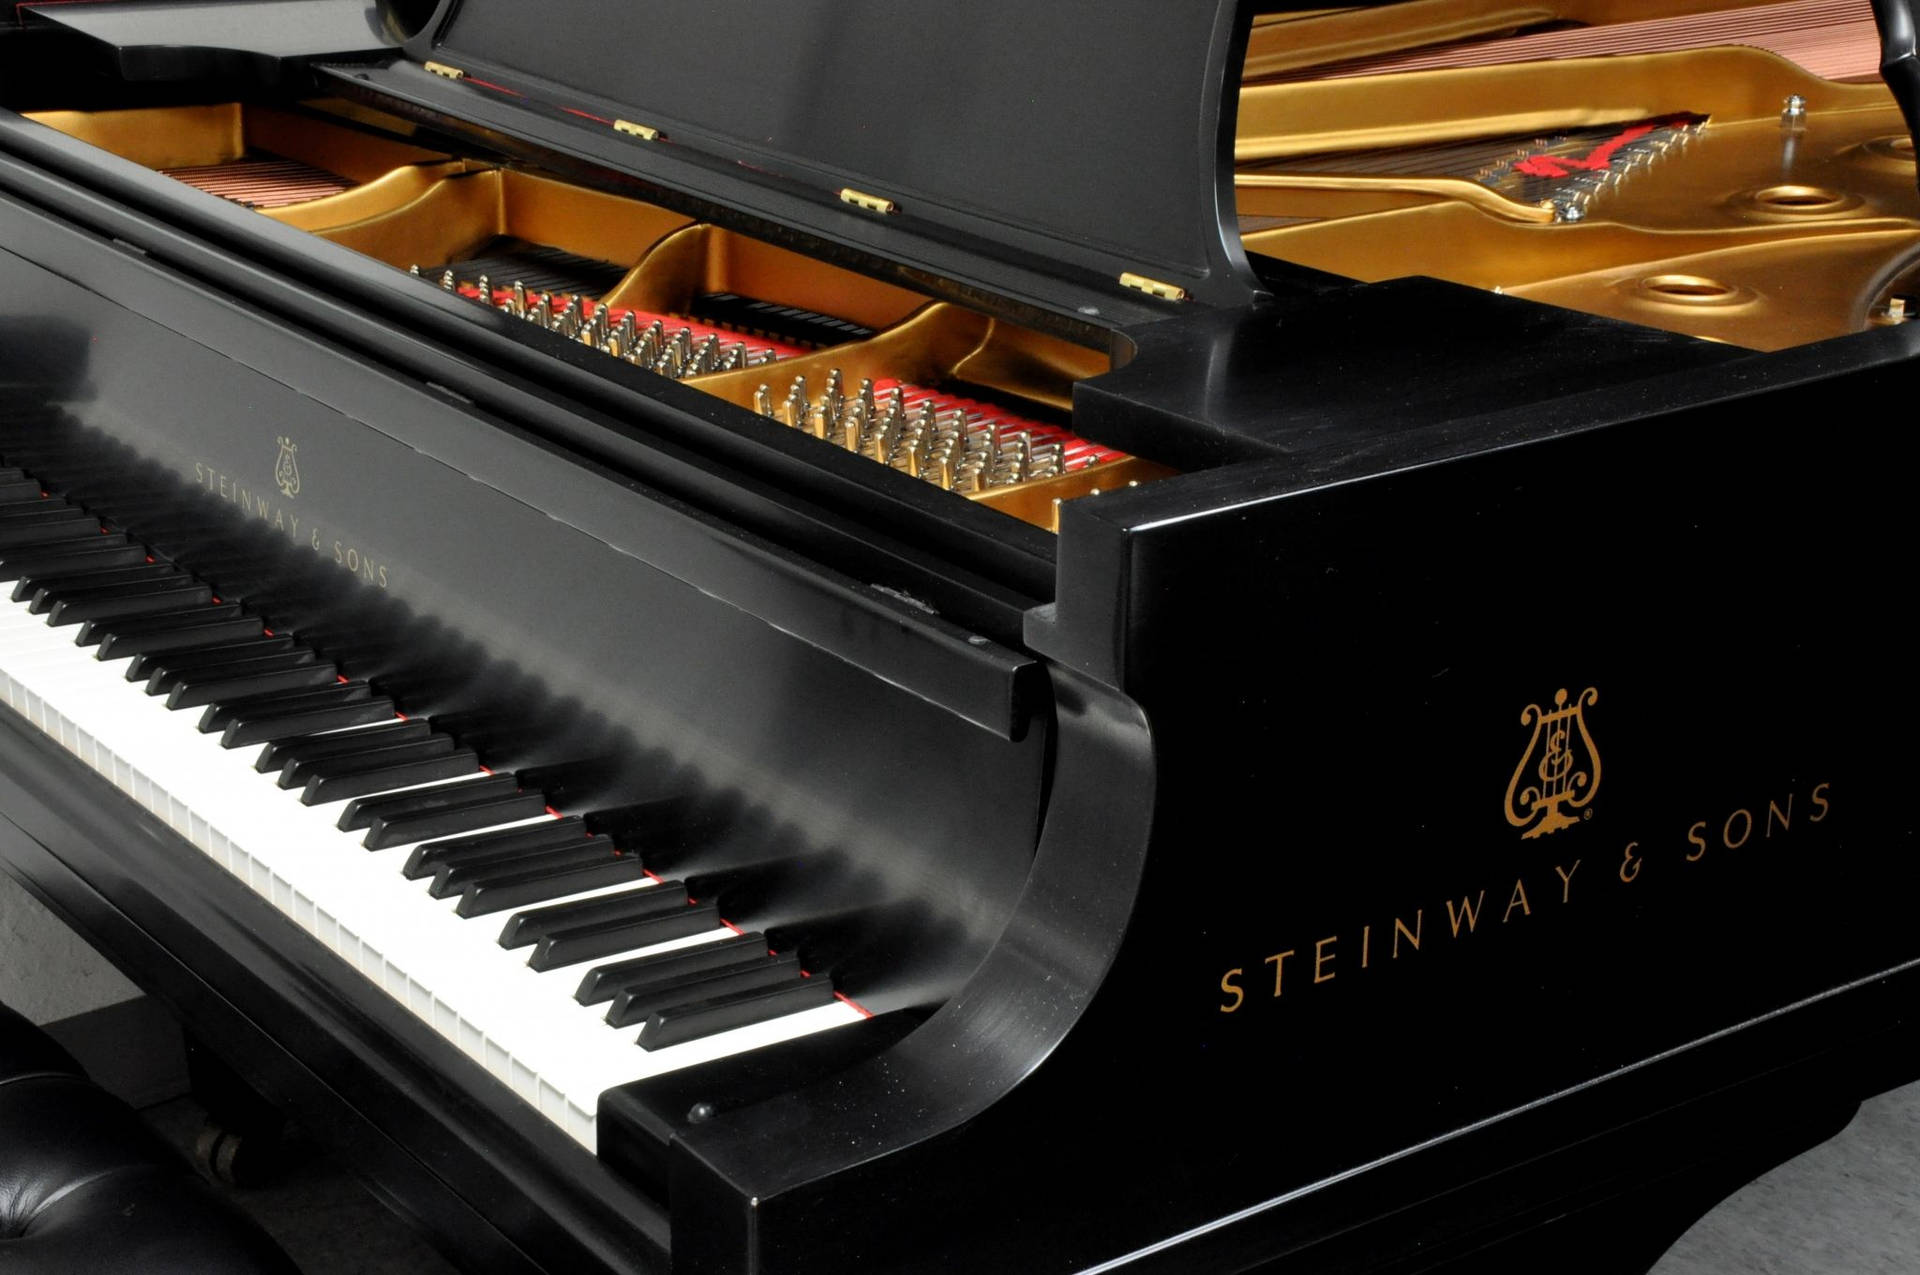 Black Steinway & Sons Grand Piano In High Resolution Wallpaper